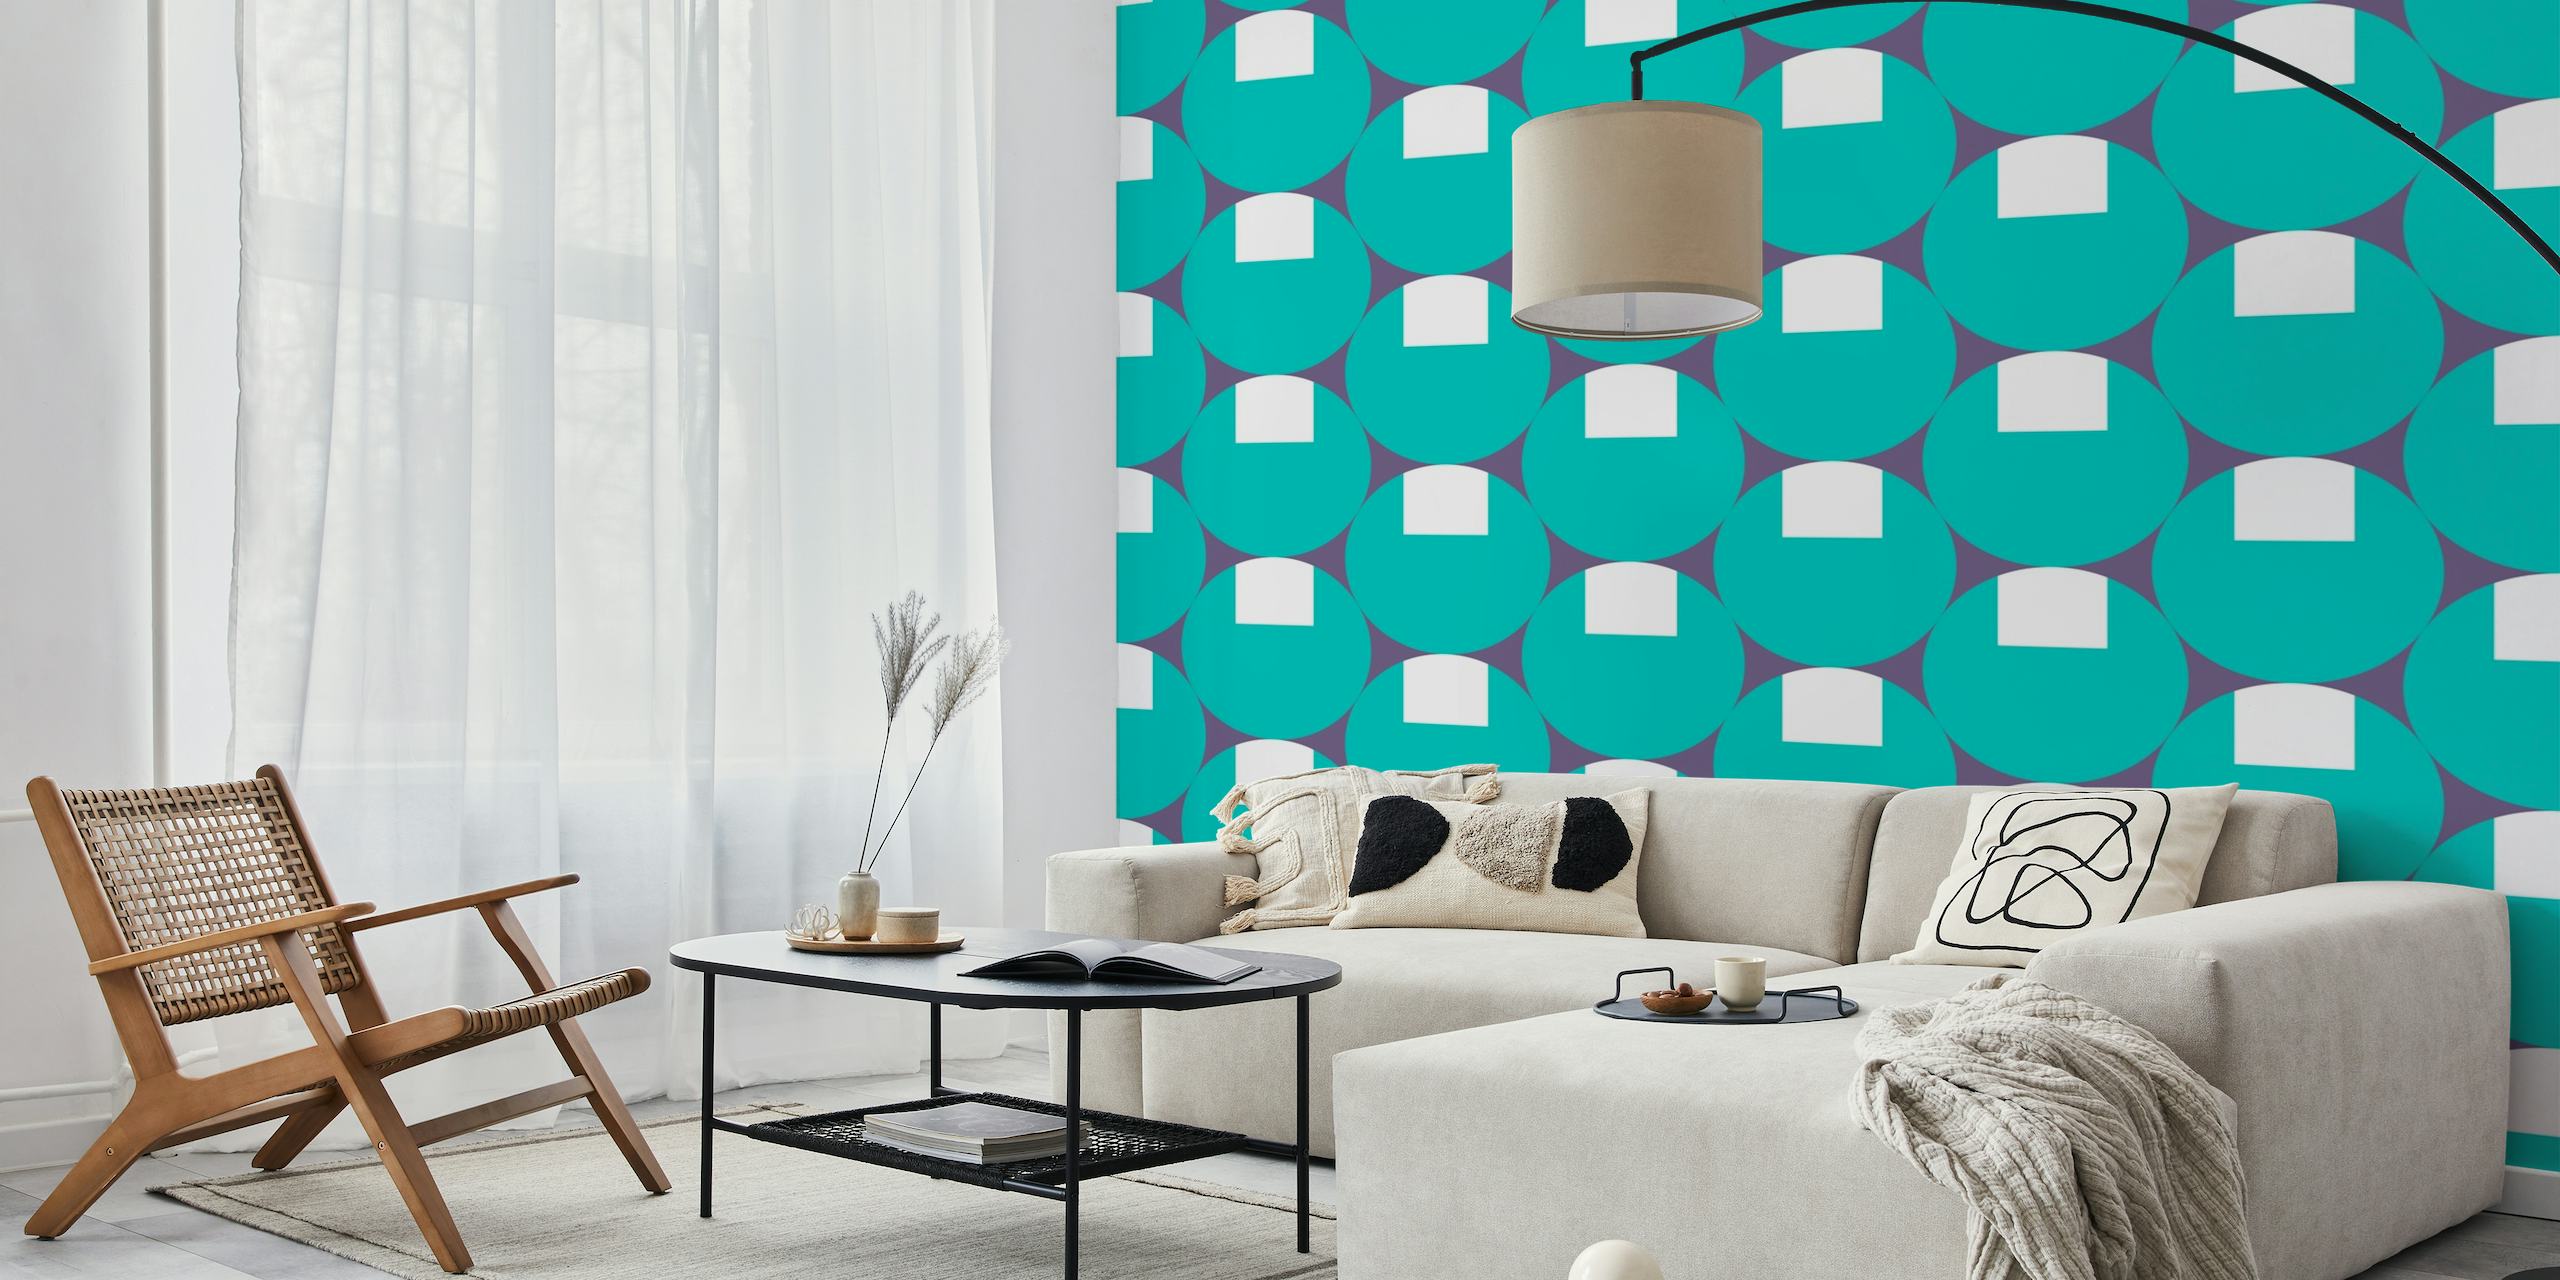 Cyan and white geometric grid pattern wall mural in a retro mod design